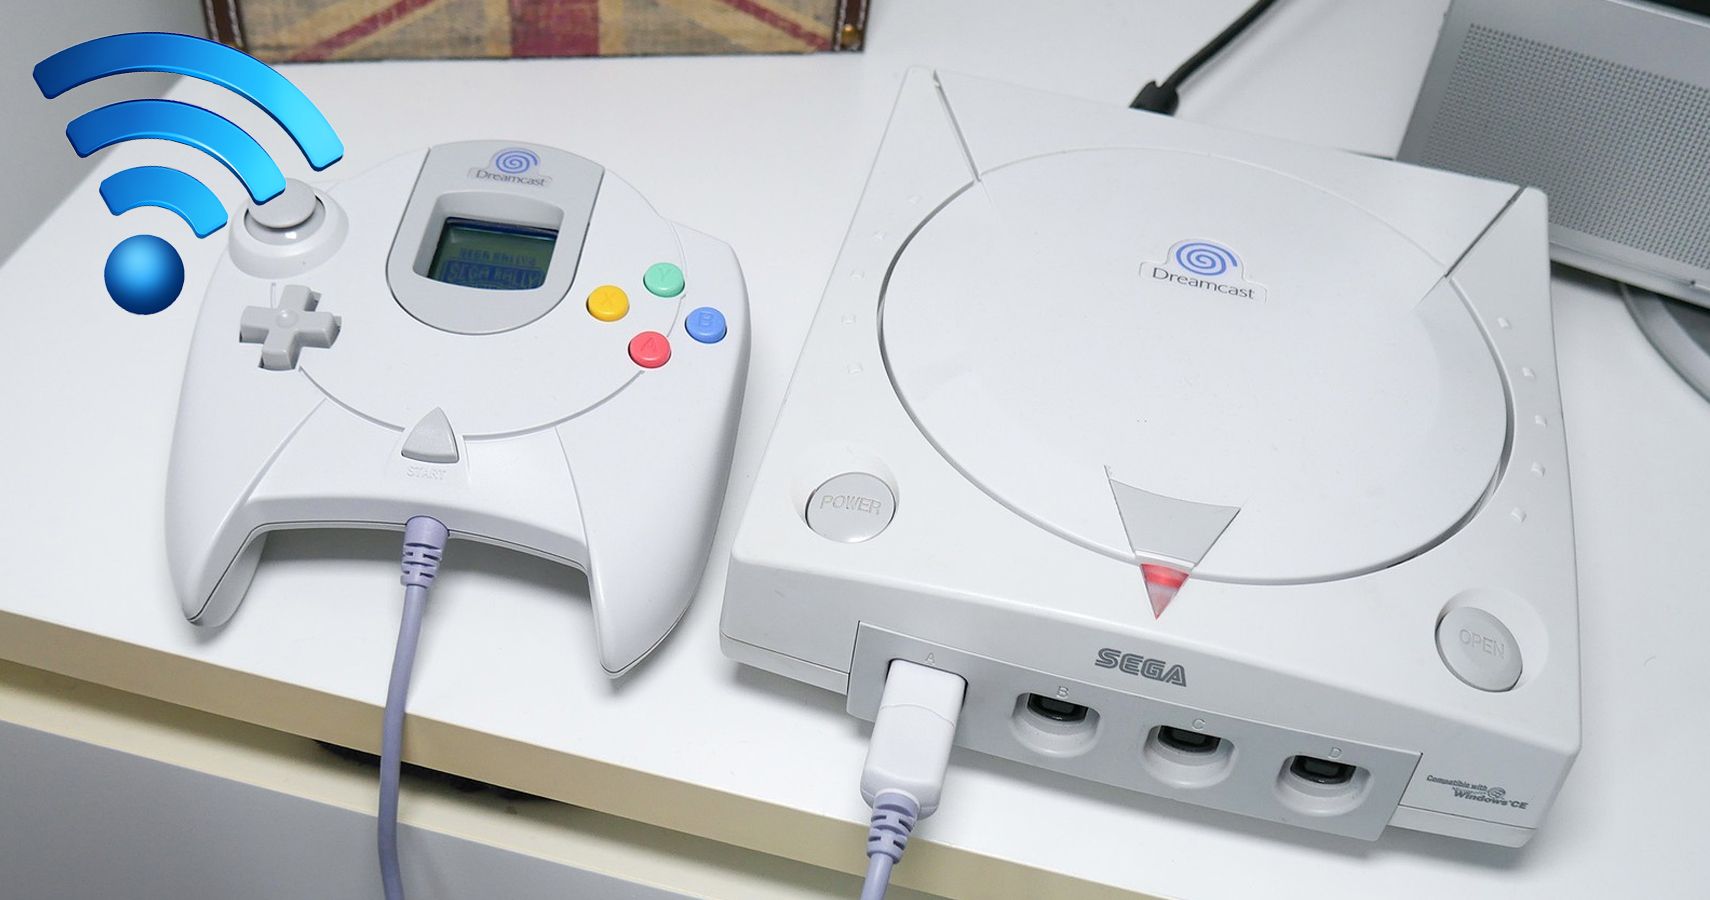 25 Things Only Super Fans Knew The Sega Dreamcast Could Do